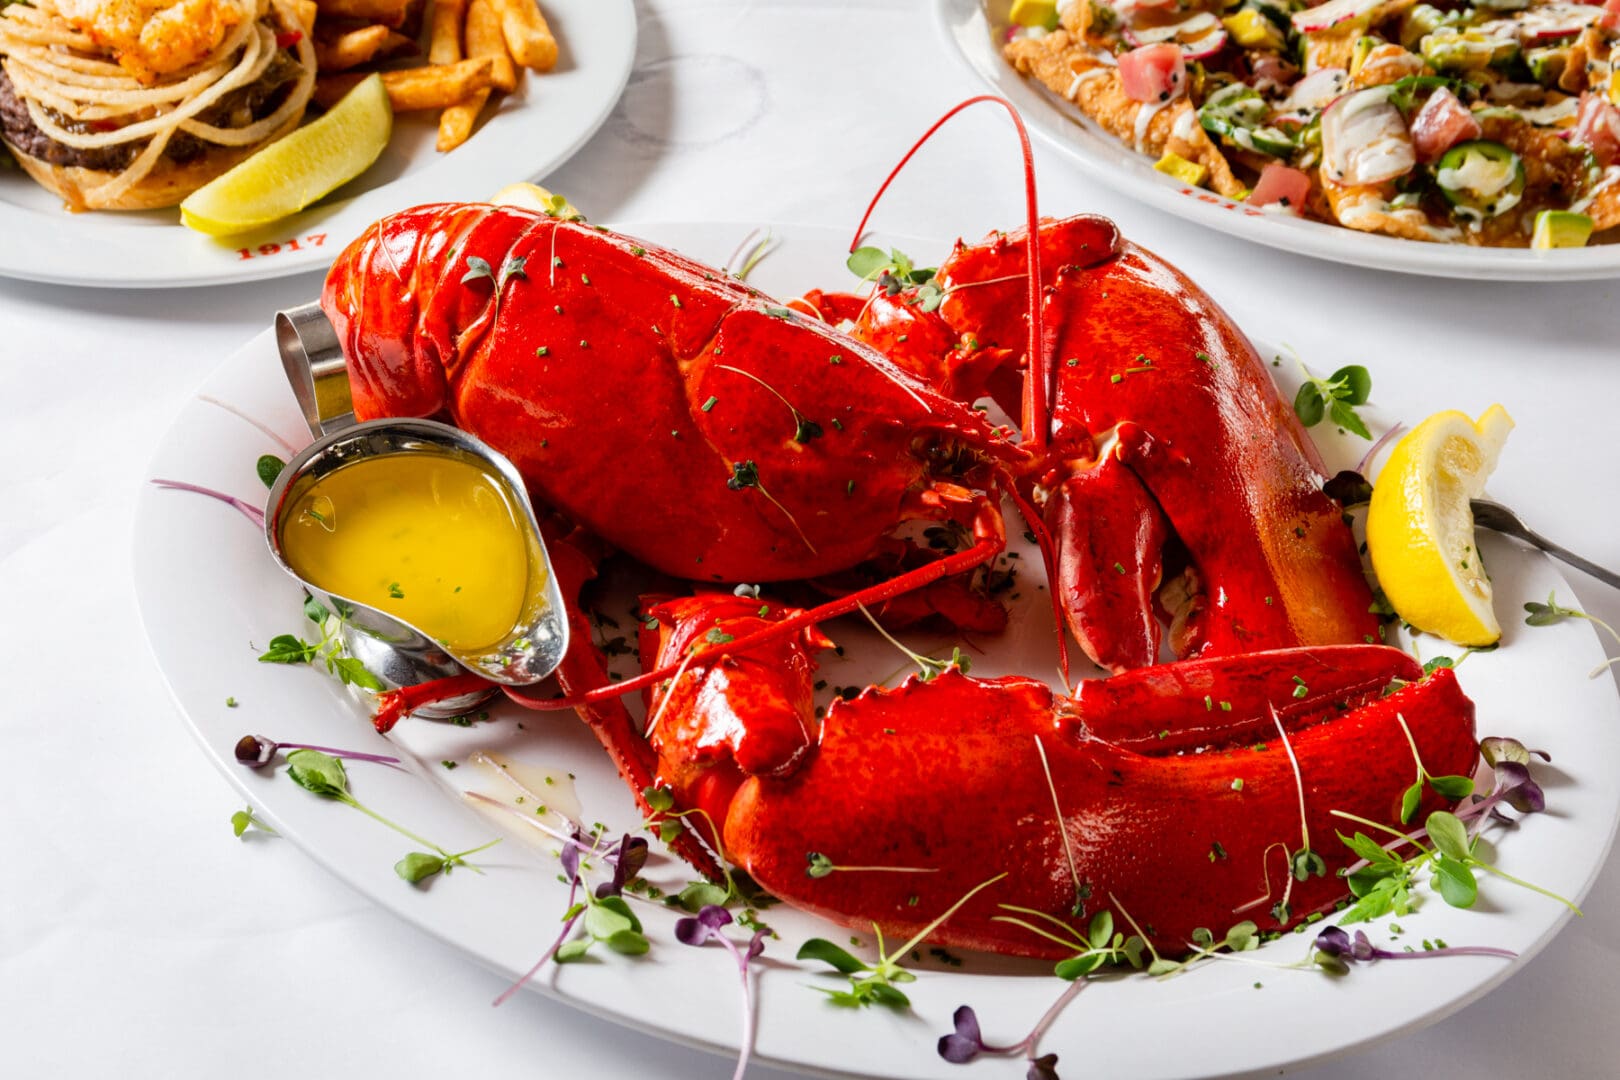 A plate of lobster with mustard and salad.